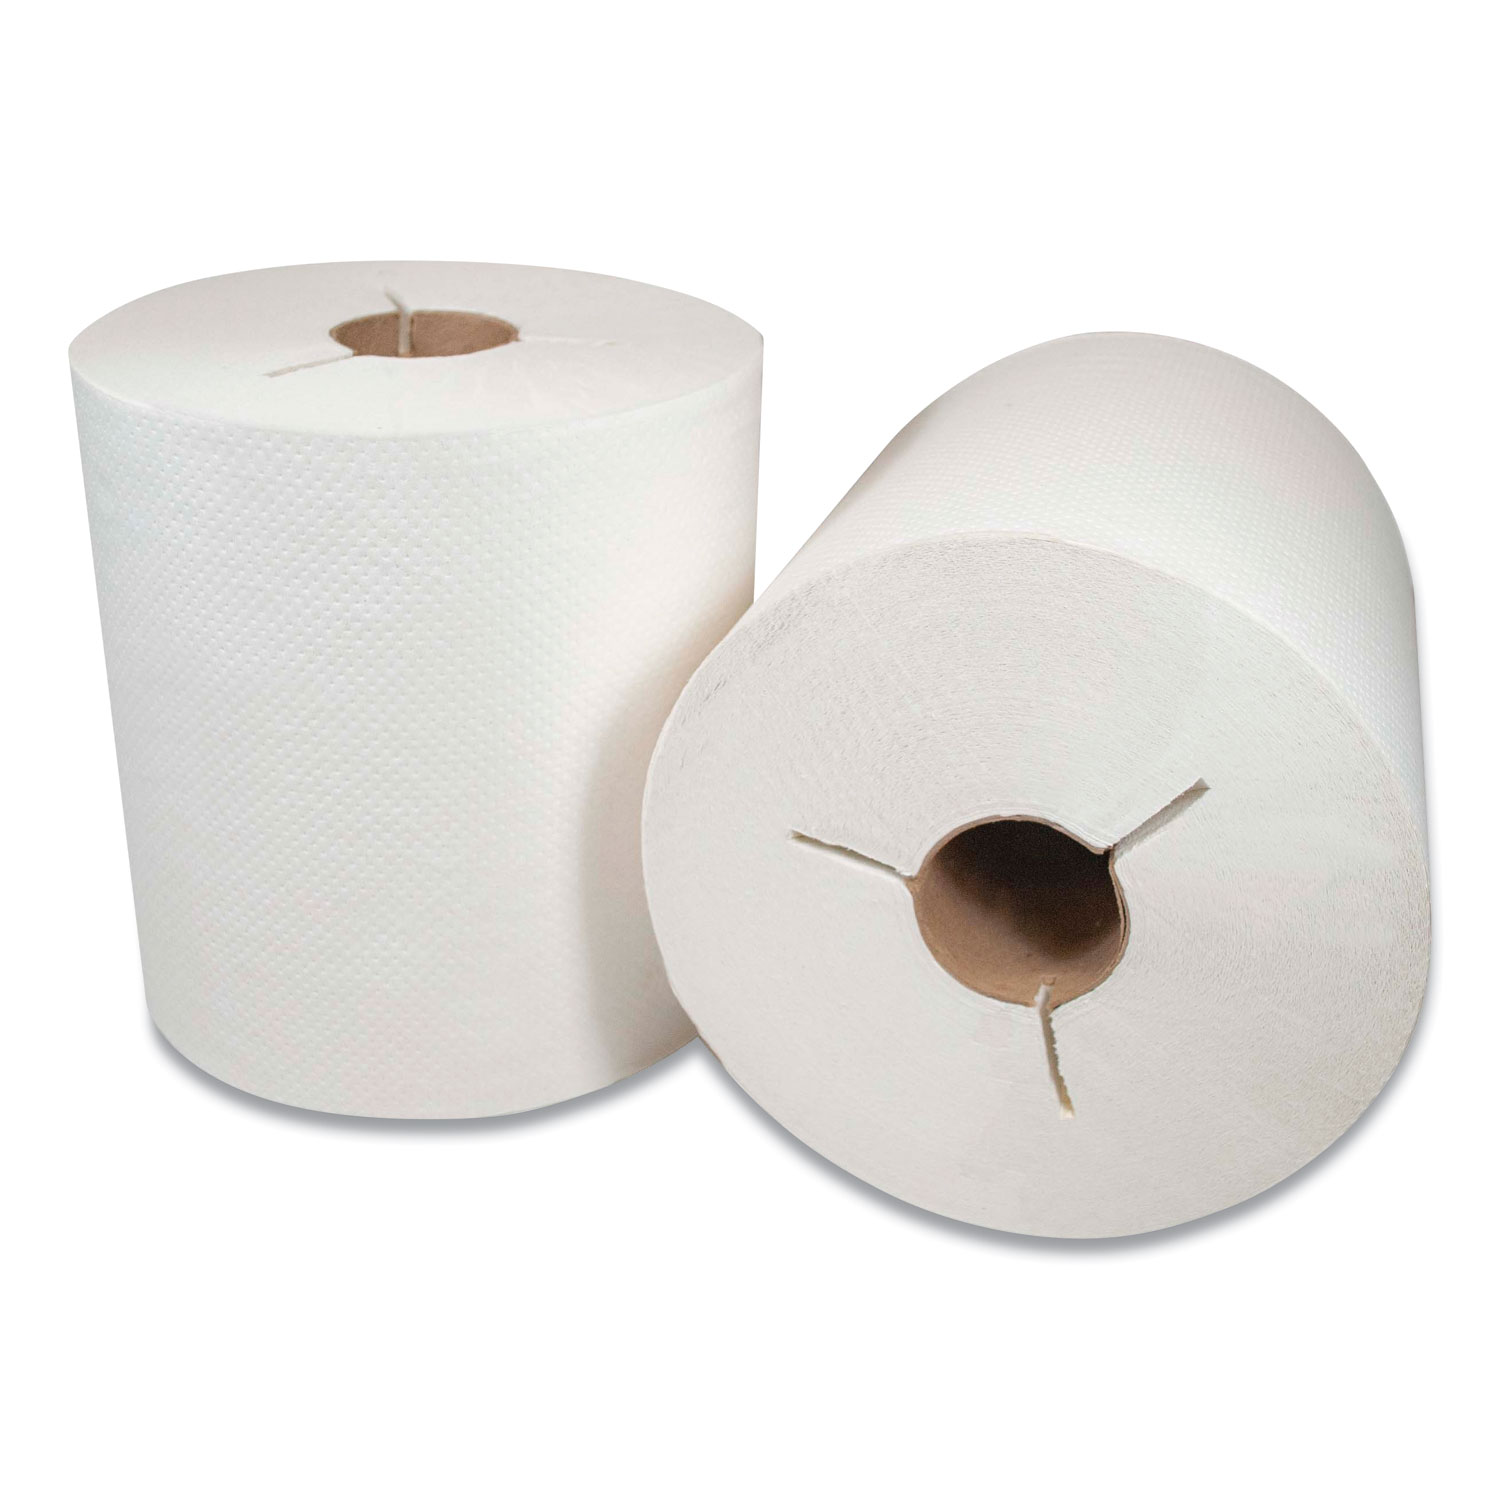  Morcon Tissue 400WY Morsoft Controlled Towels, Y-Notch, 8 x 800 ft, White, 6/Carton (MOR400WY) 